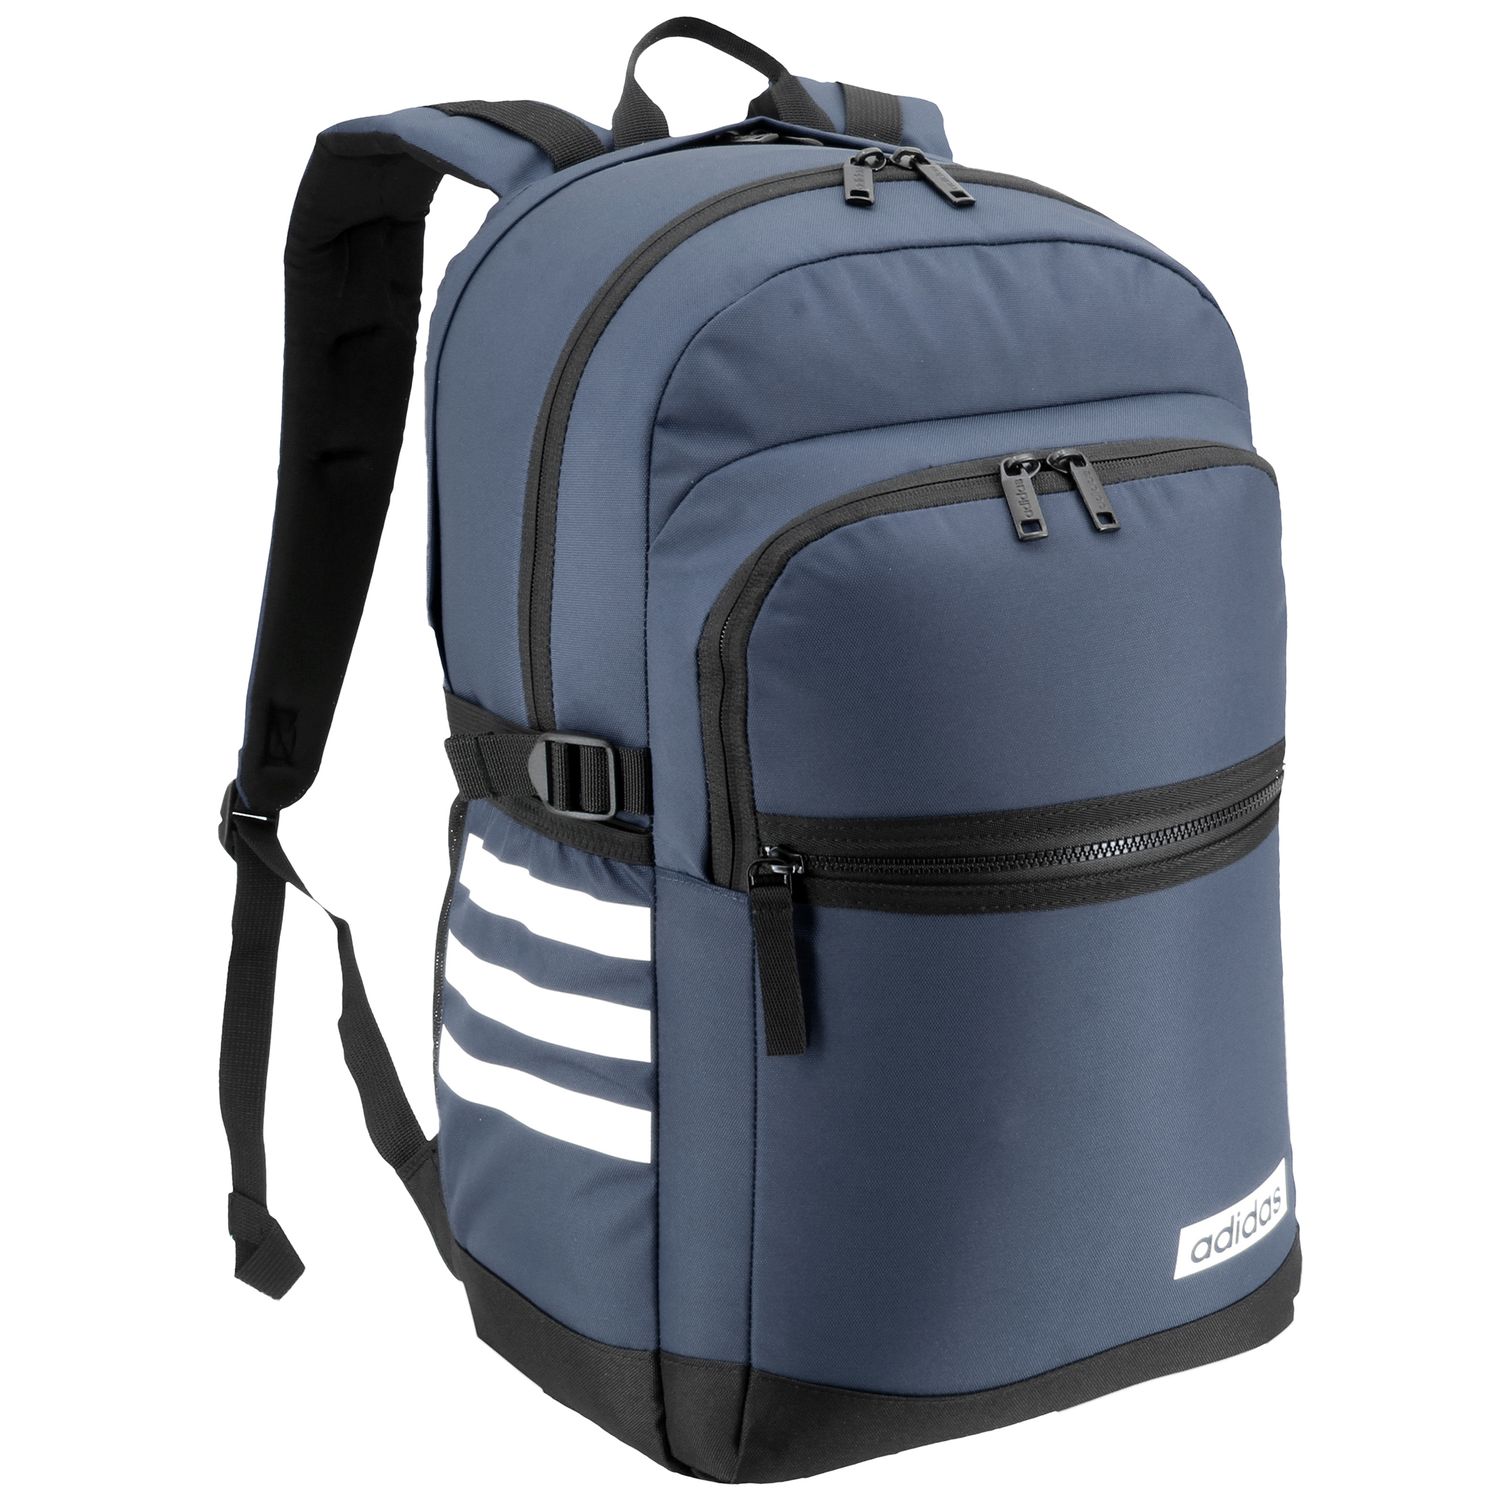 adidas 17 inch laptop backpack